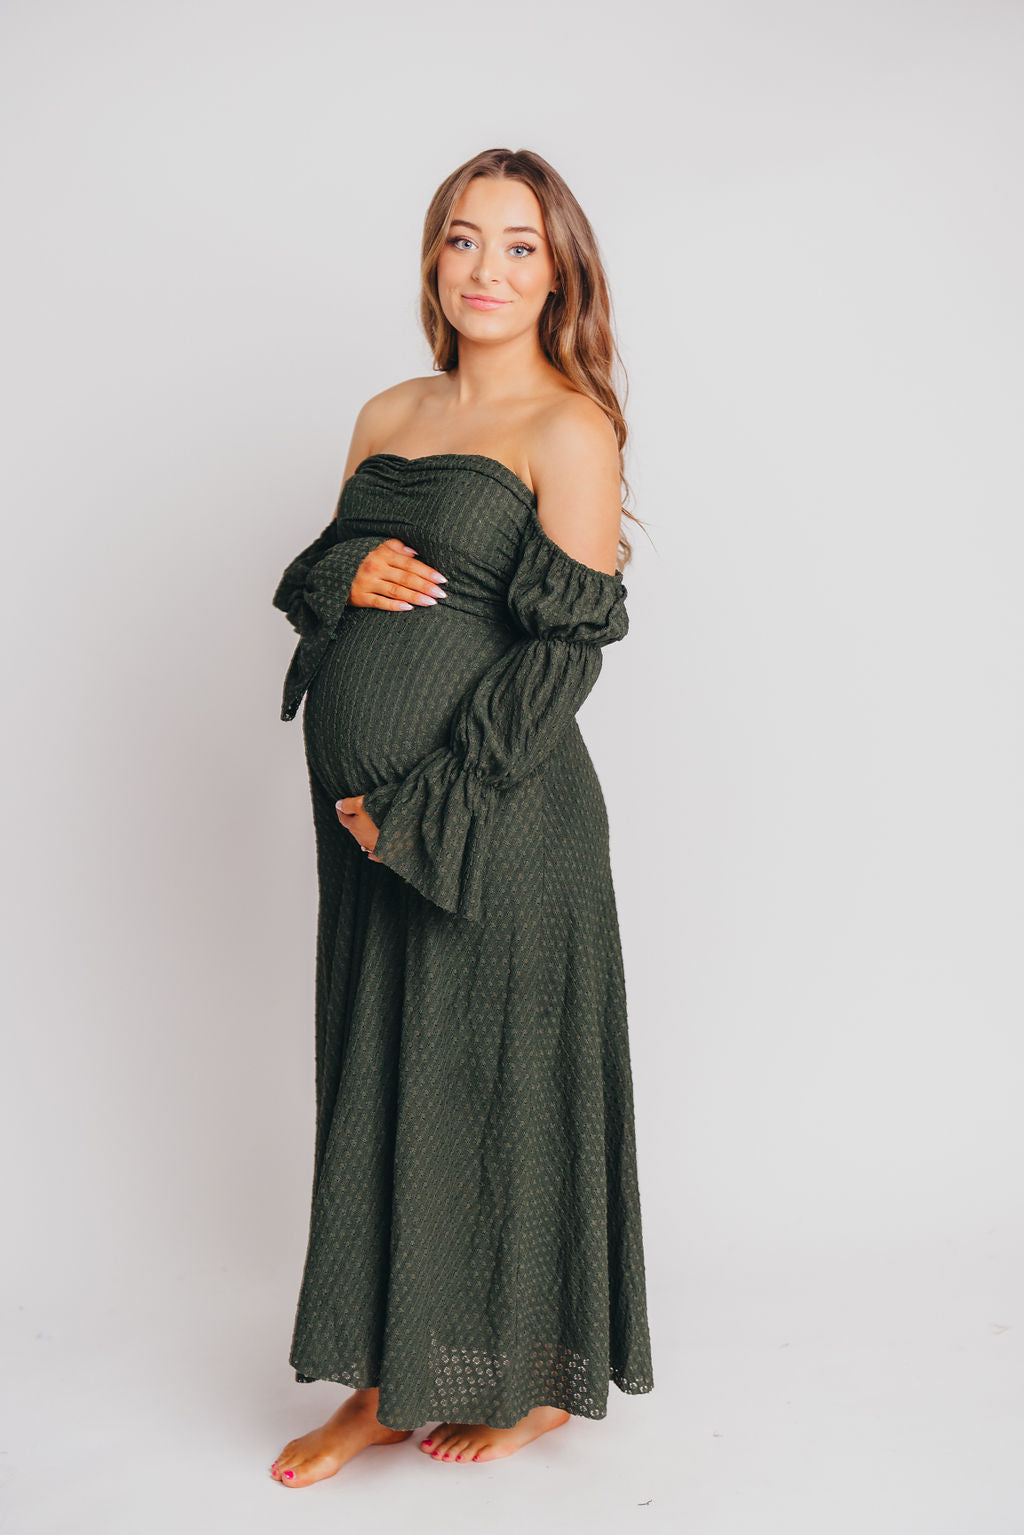 Corrine Tiered Sleeve Maxi Dress with Pockets in Hunter Green - Bump Friendly *Pre-Order Dec 7* Fasting Selling Dress of the Season - Last Restock